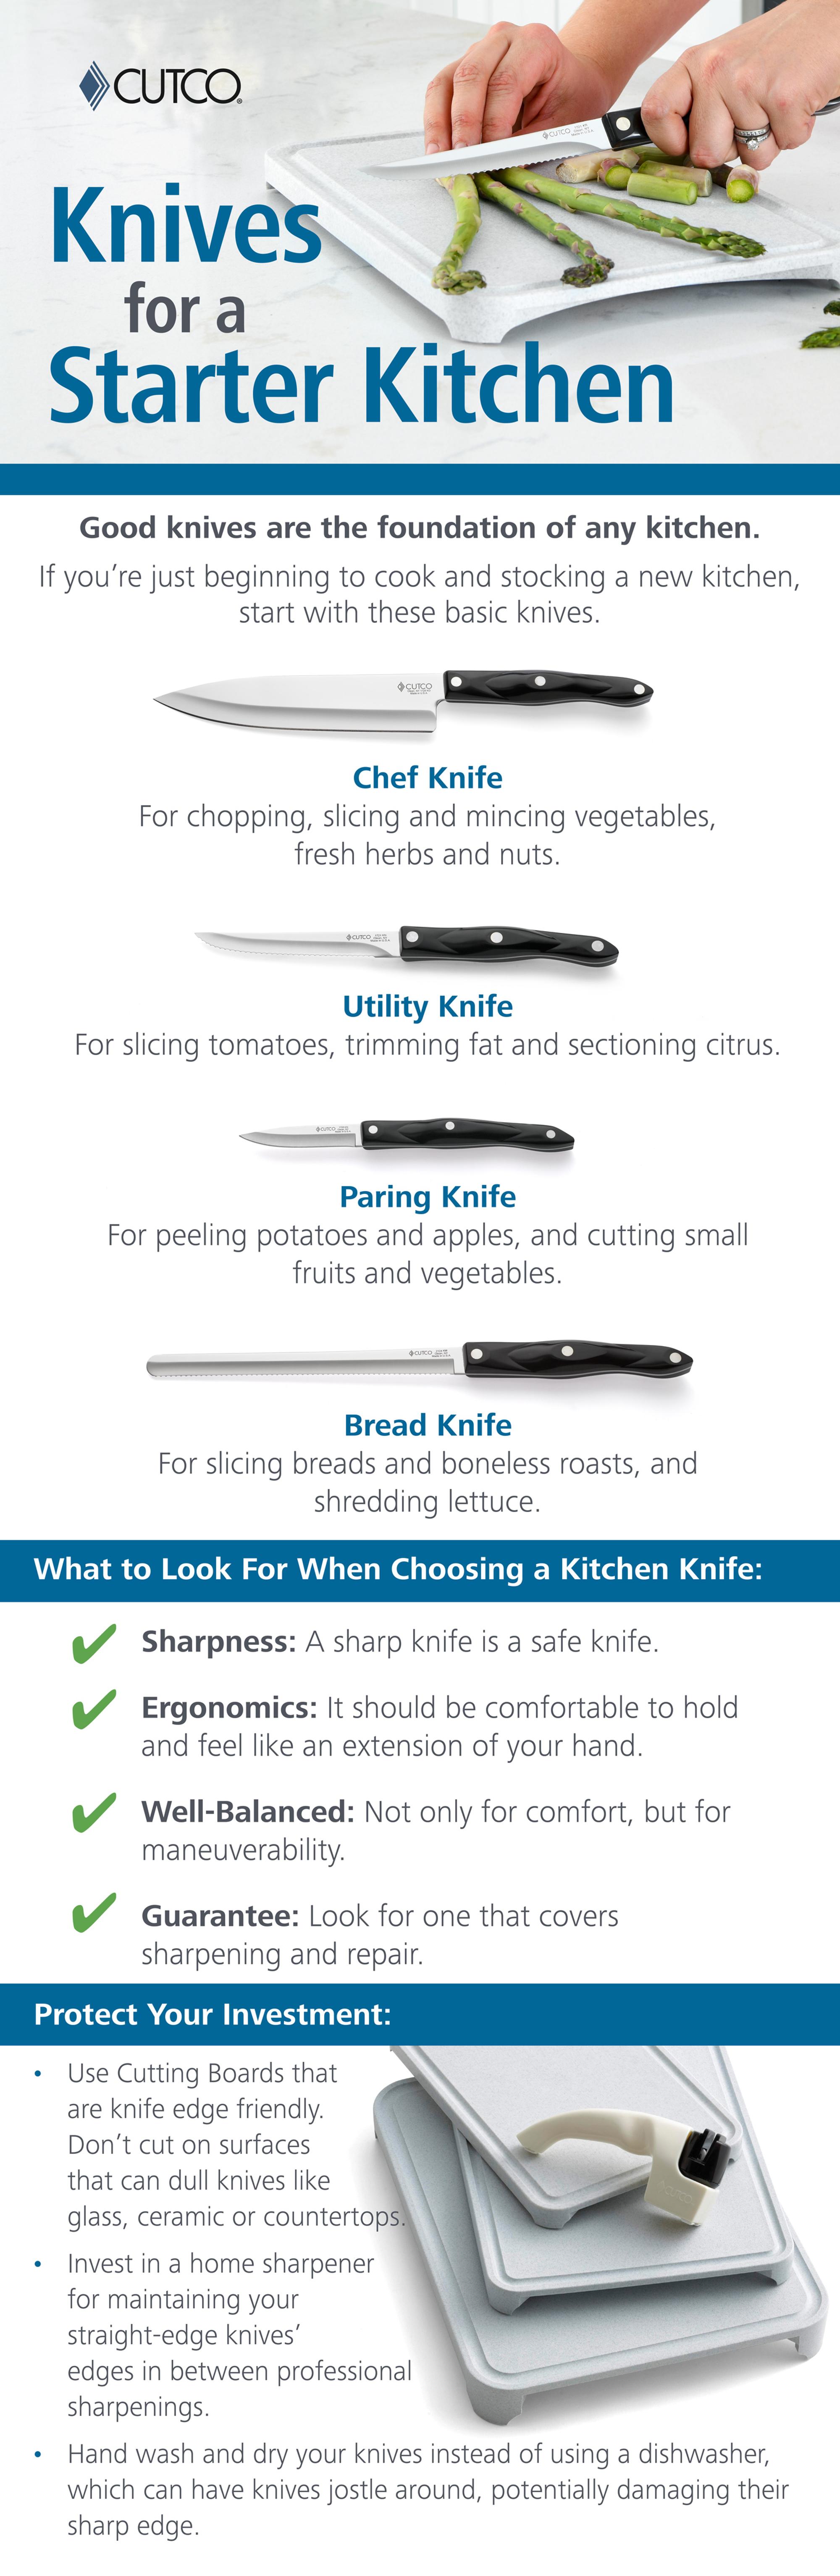 Knives for a starter kitchen infographic.